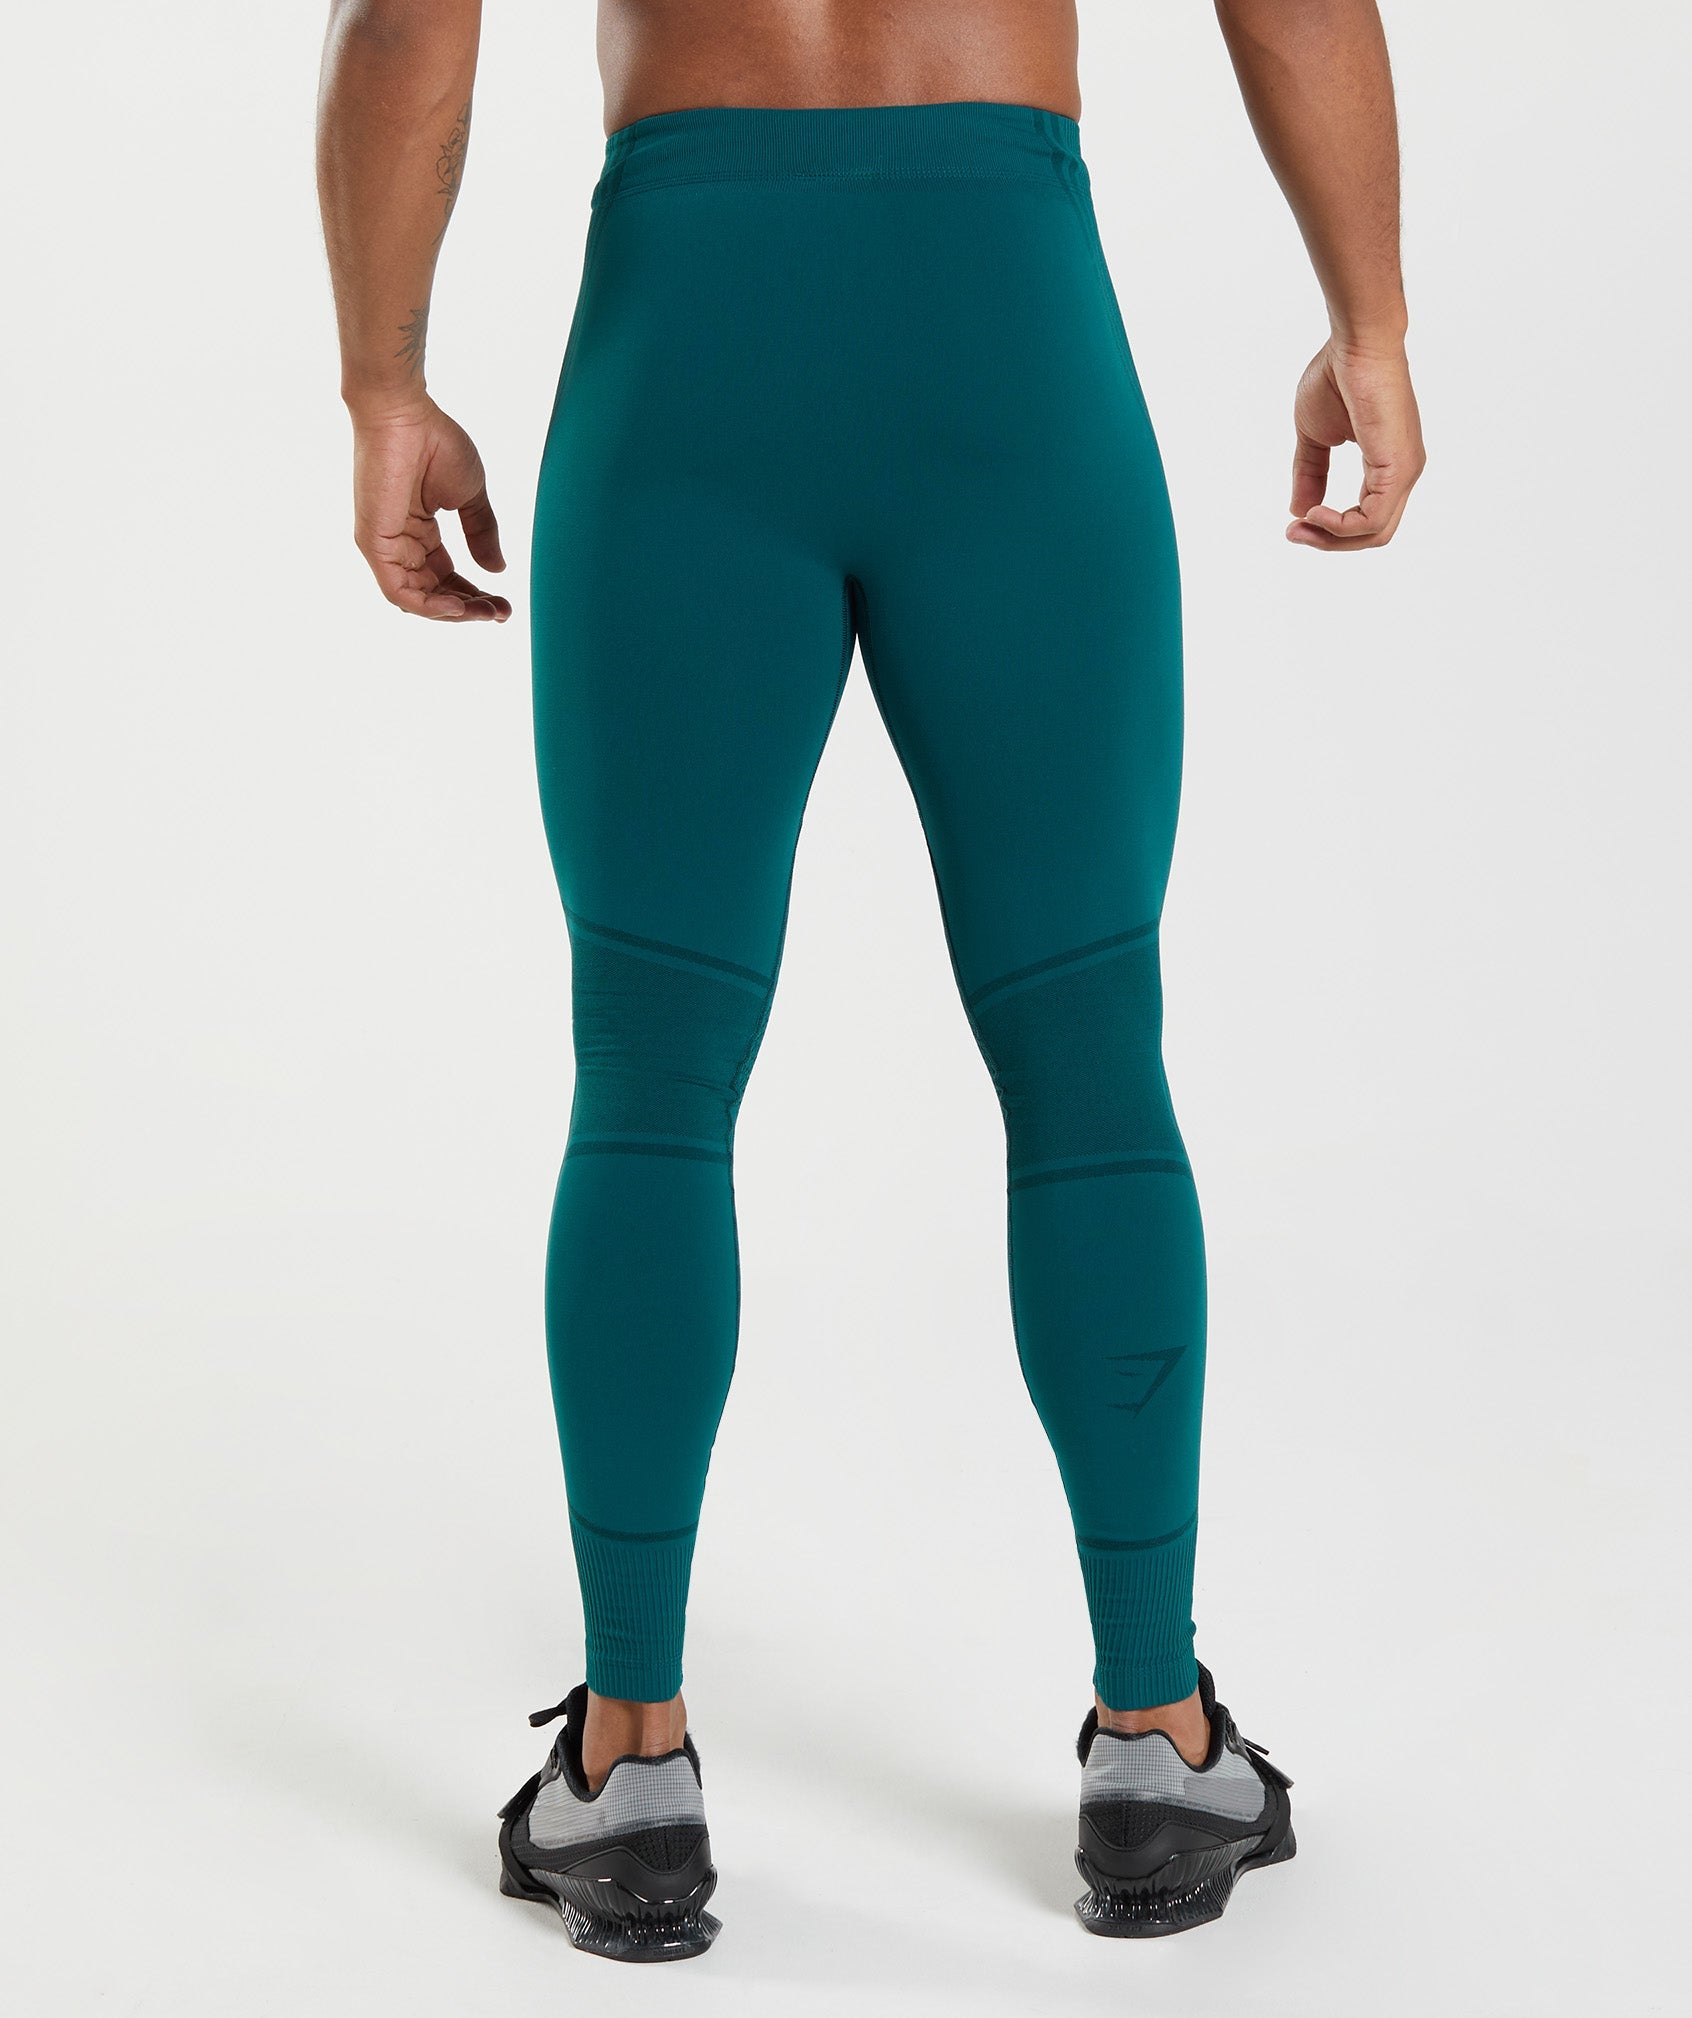 315 Seamless Tights in Winter Teal/Black